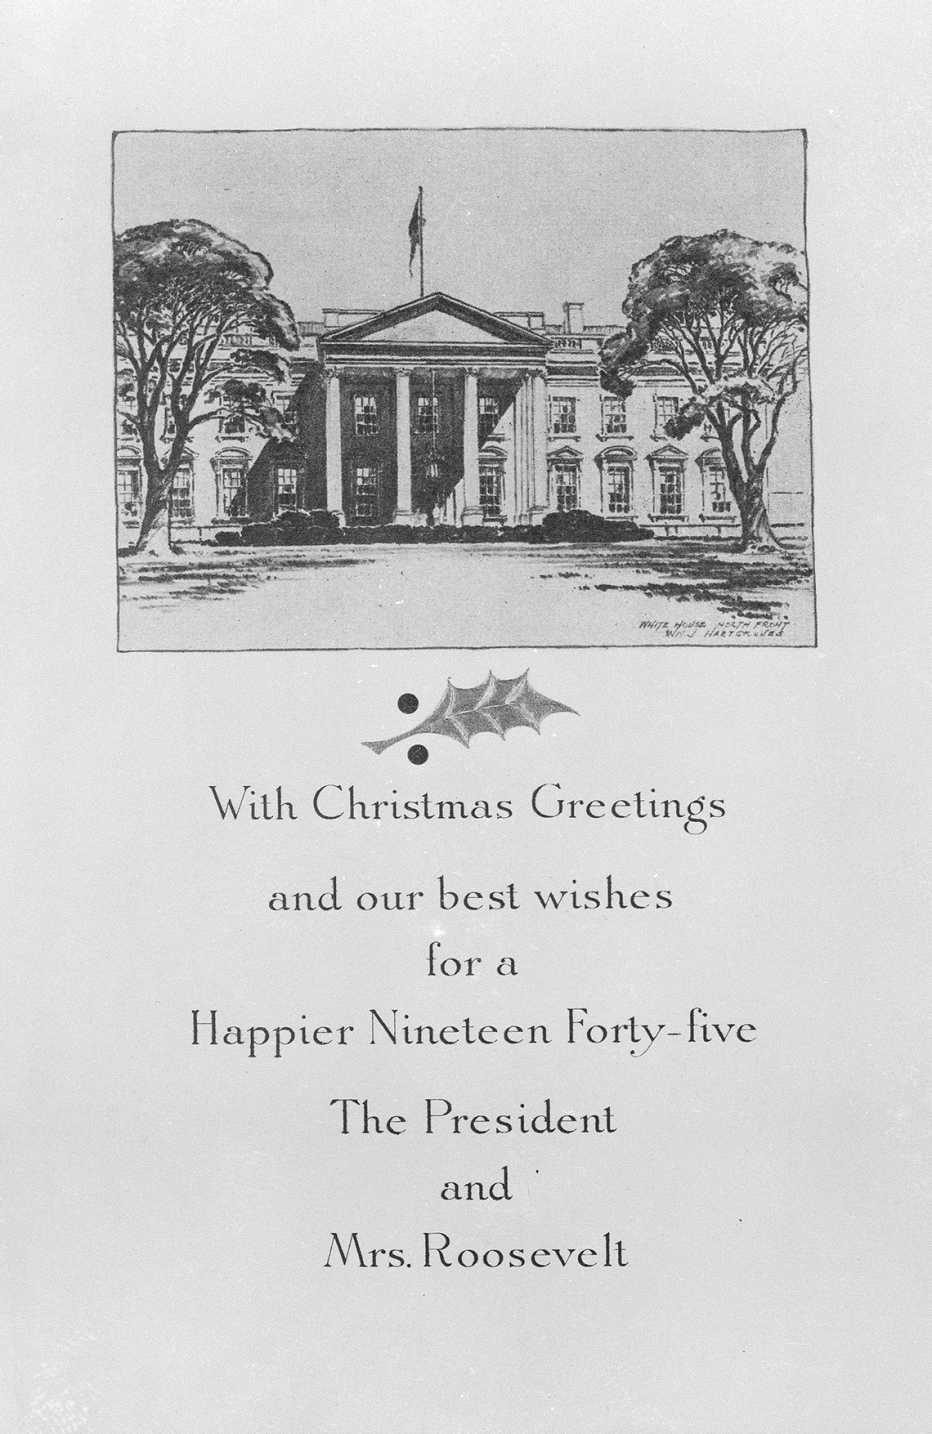 president roosevelt's holiday card shows the white house along with christmas wishes